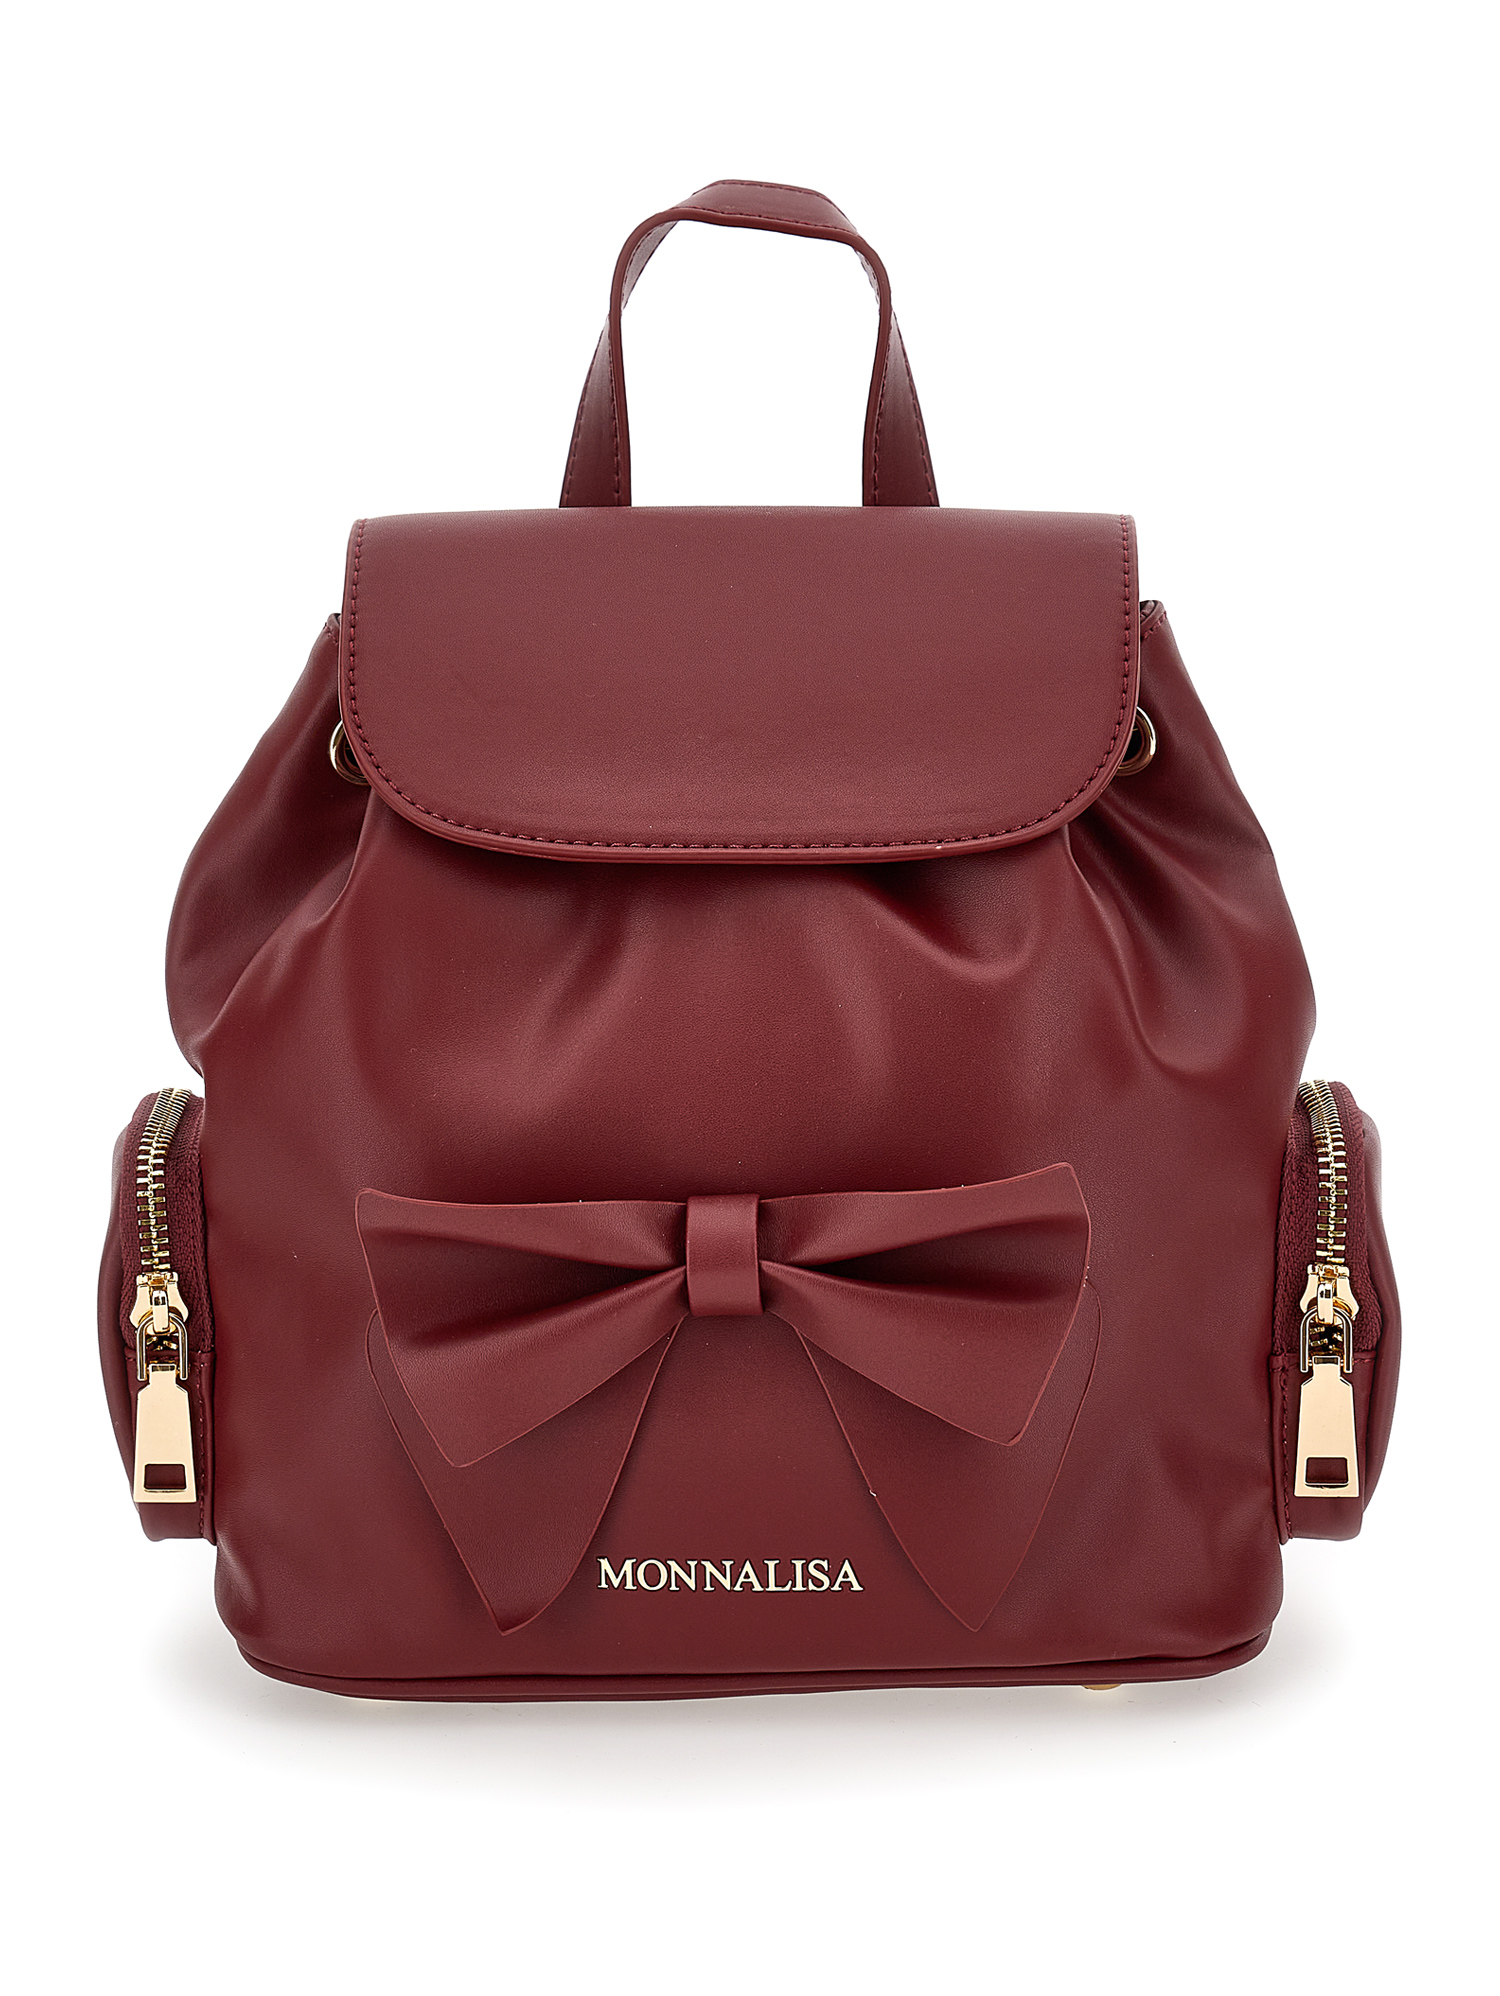 Monnalisa Regenerated Leather Backpack In Pomegranate